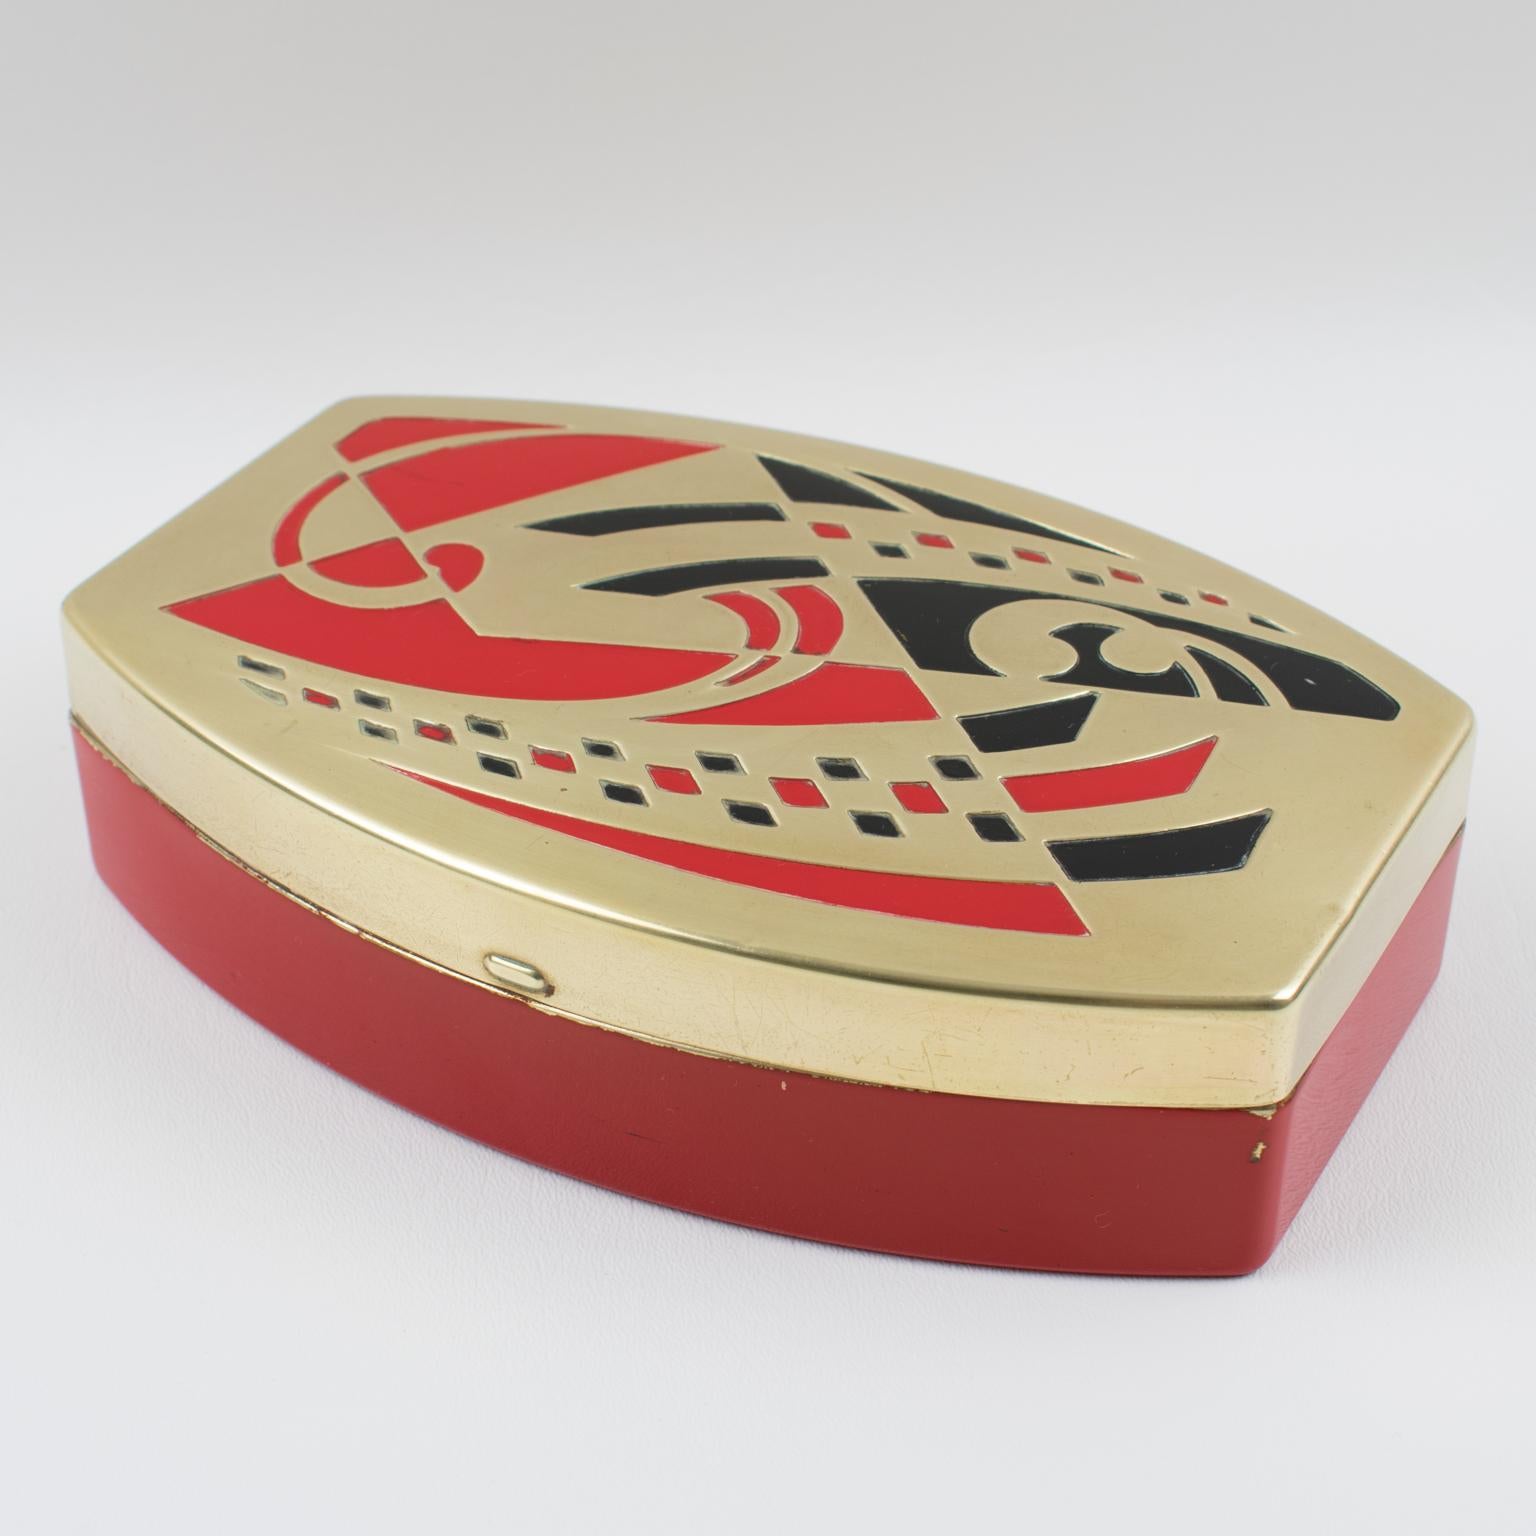 Stunning Art Deco decorative jewelry or vanity box with embossed lid made by Scovill, USA. The box features a red bottom and a gilt color lid with embossed red and black abstract geometric design on the top. Marked at hinge: 